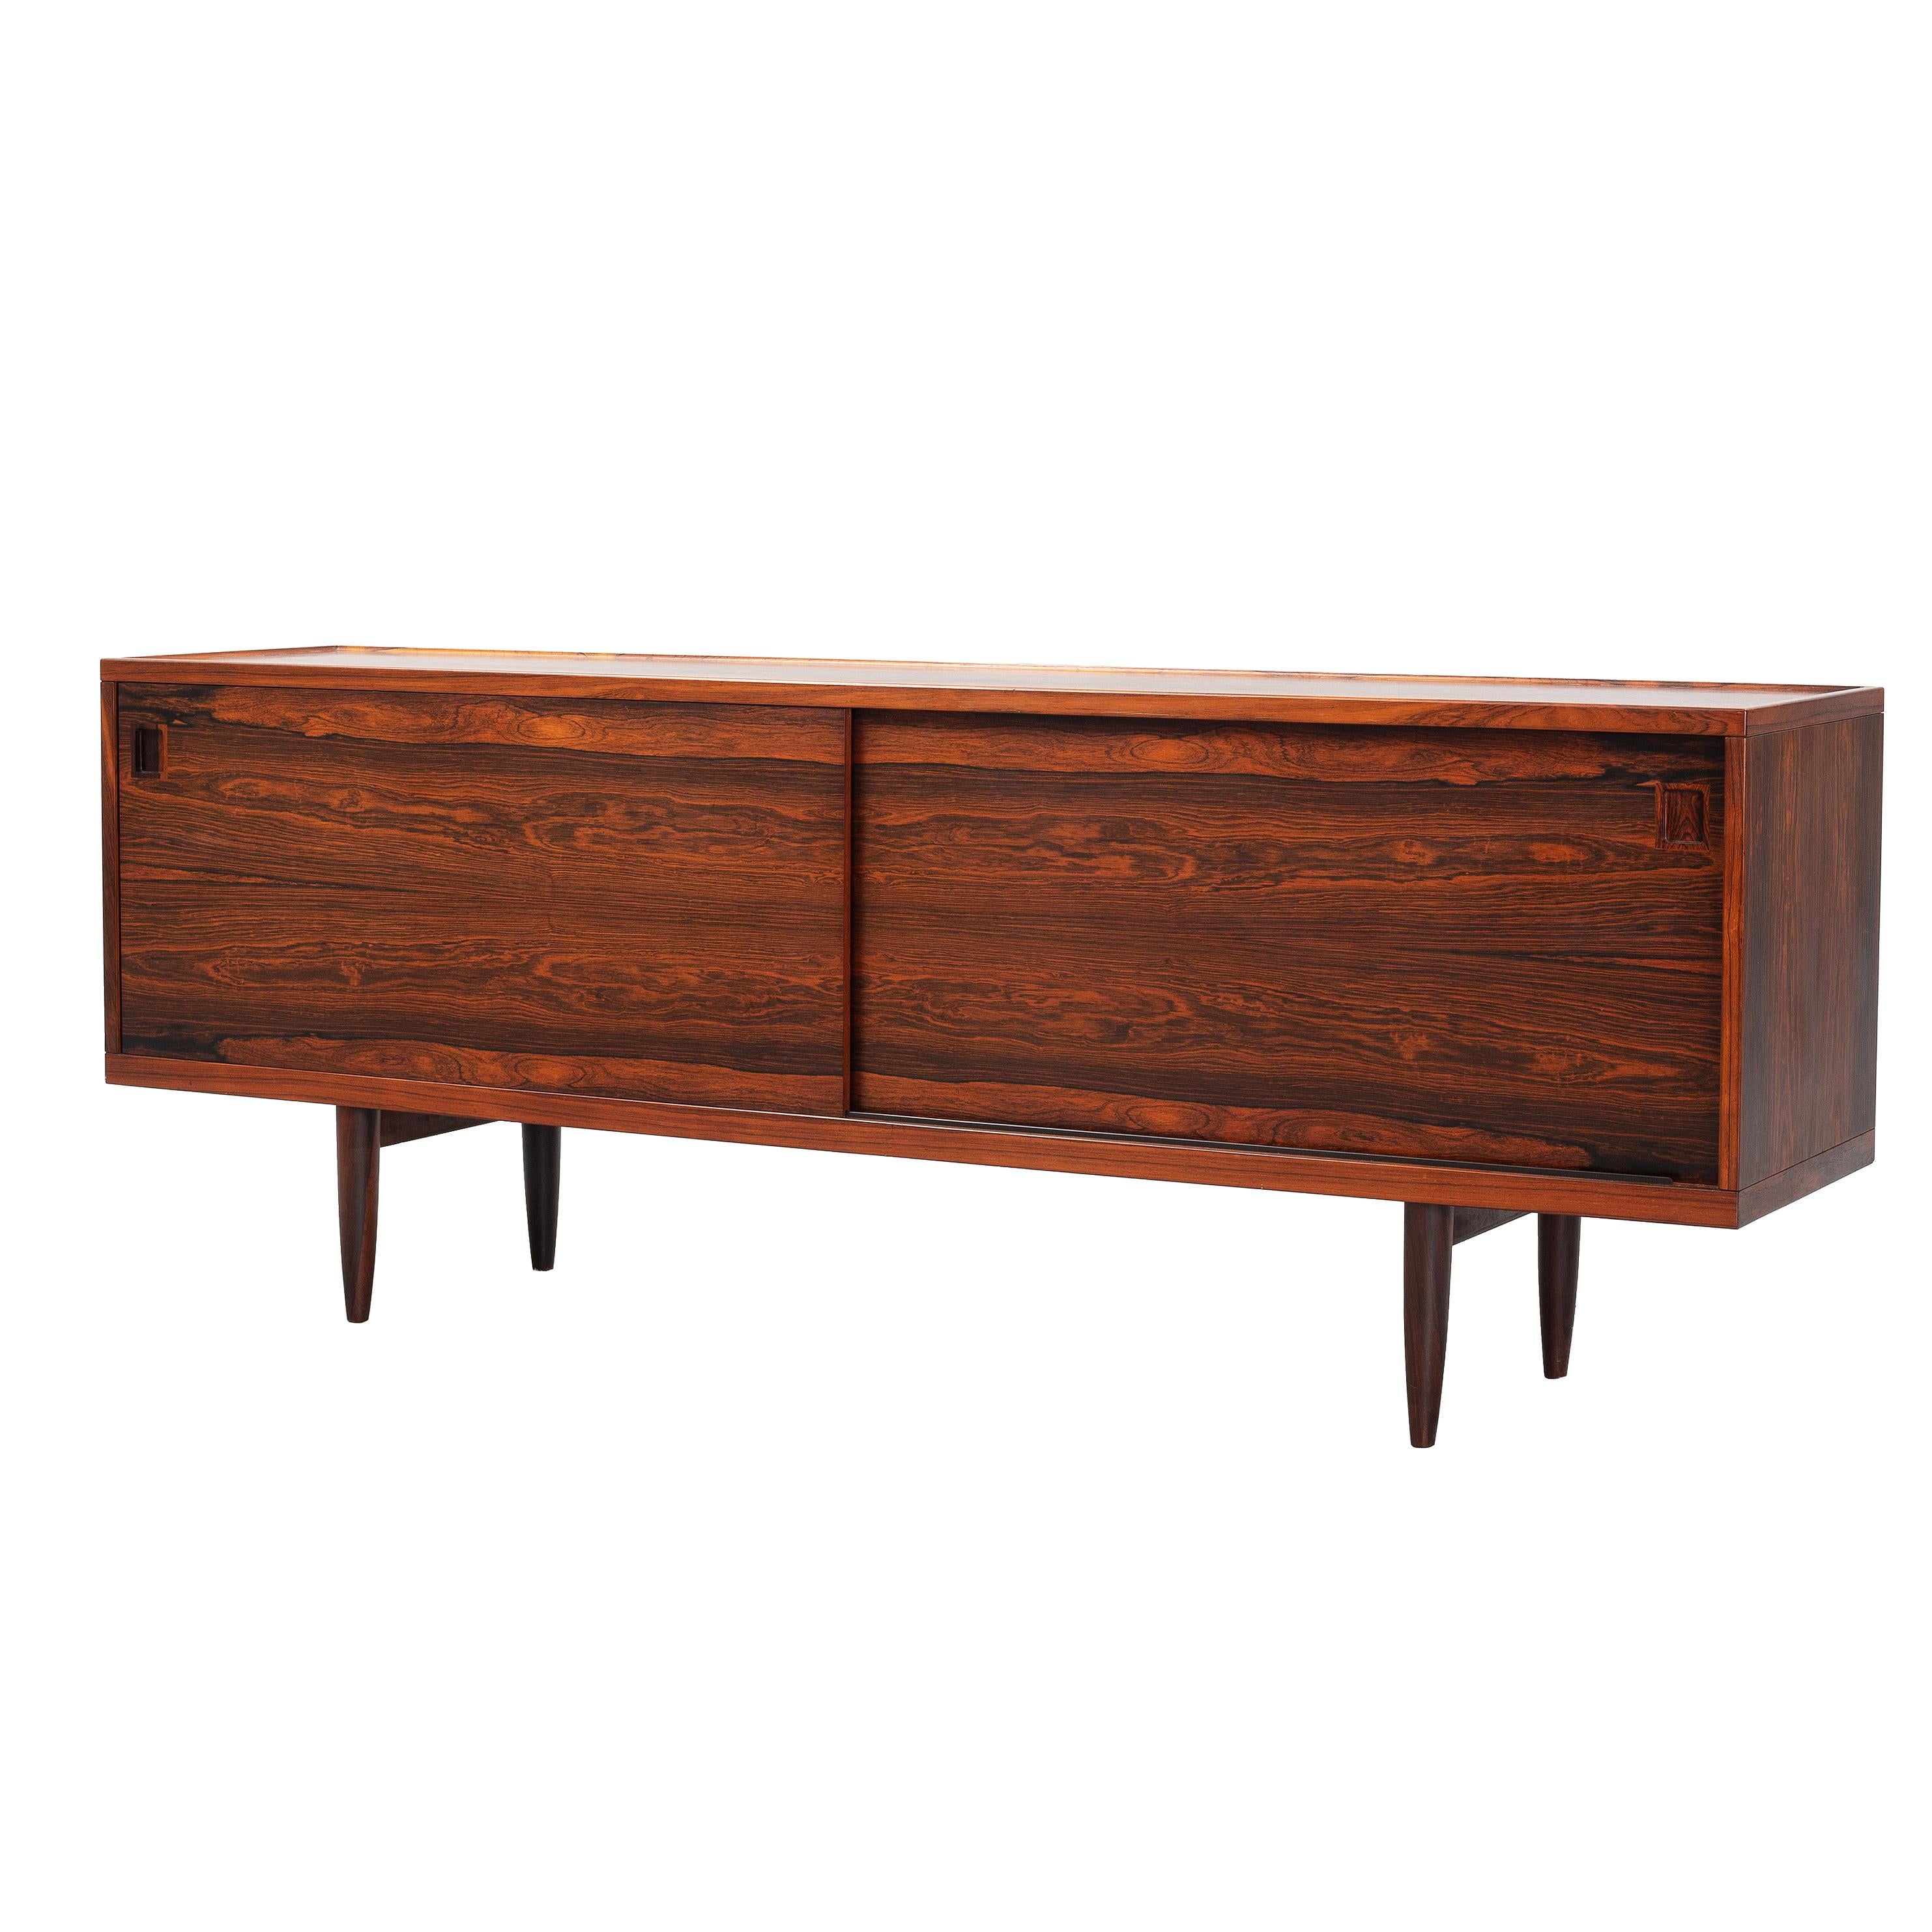 Rare and gorgeous Danish sideboard  Model 20 by Niels Otto Moller for J.L. Mollers in rosewood 1960.
Clean modern design with 2 sliding doors, shelves and 4 drawers inside.
Adjustable shelves. Nice detailed wood grain.
Slight traces of use. Rare